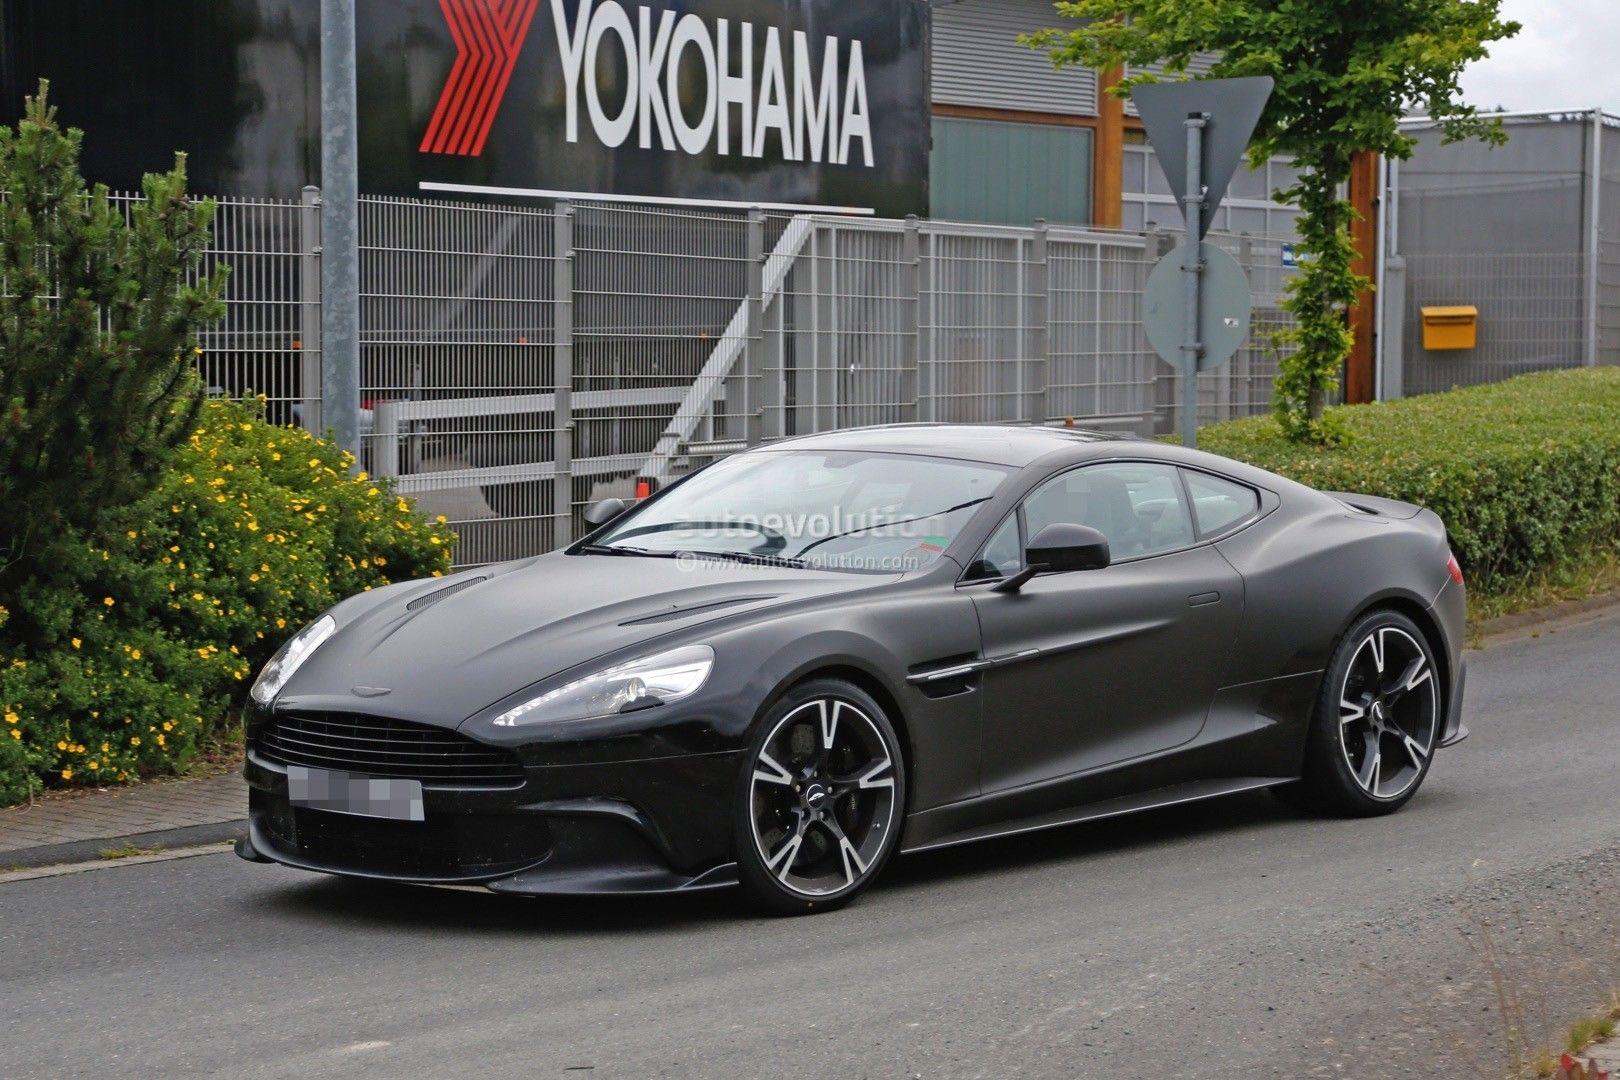 Aston Martin Vanquish S Spied for the First Time